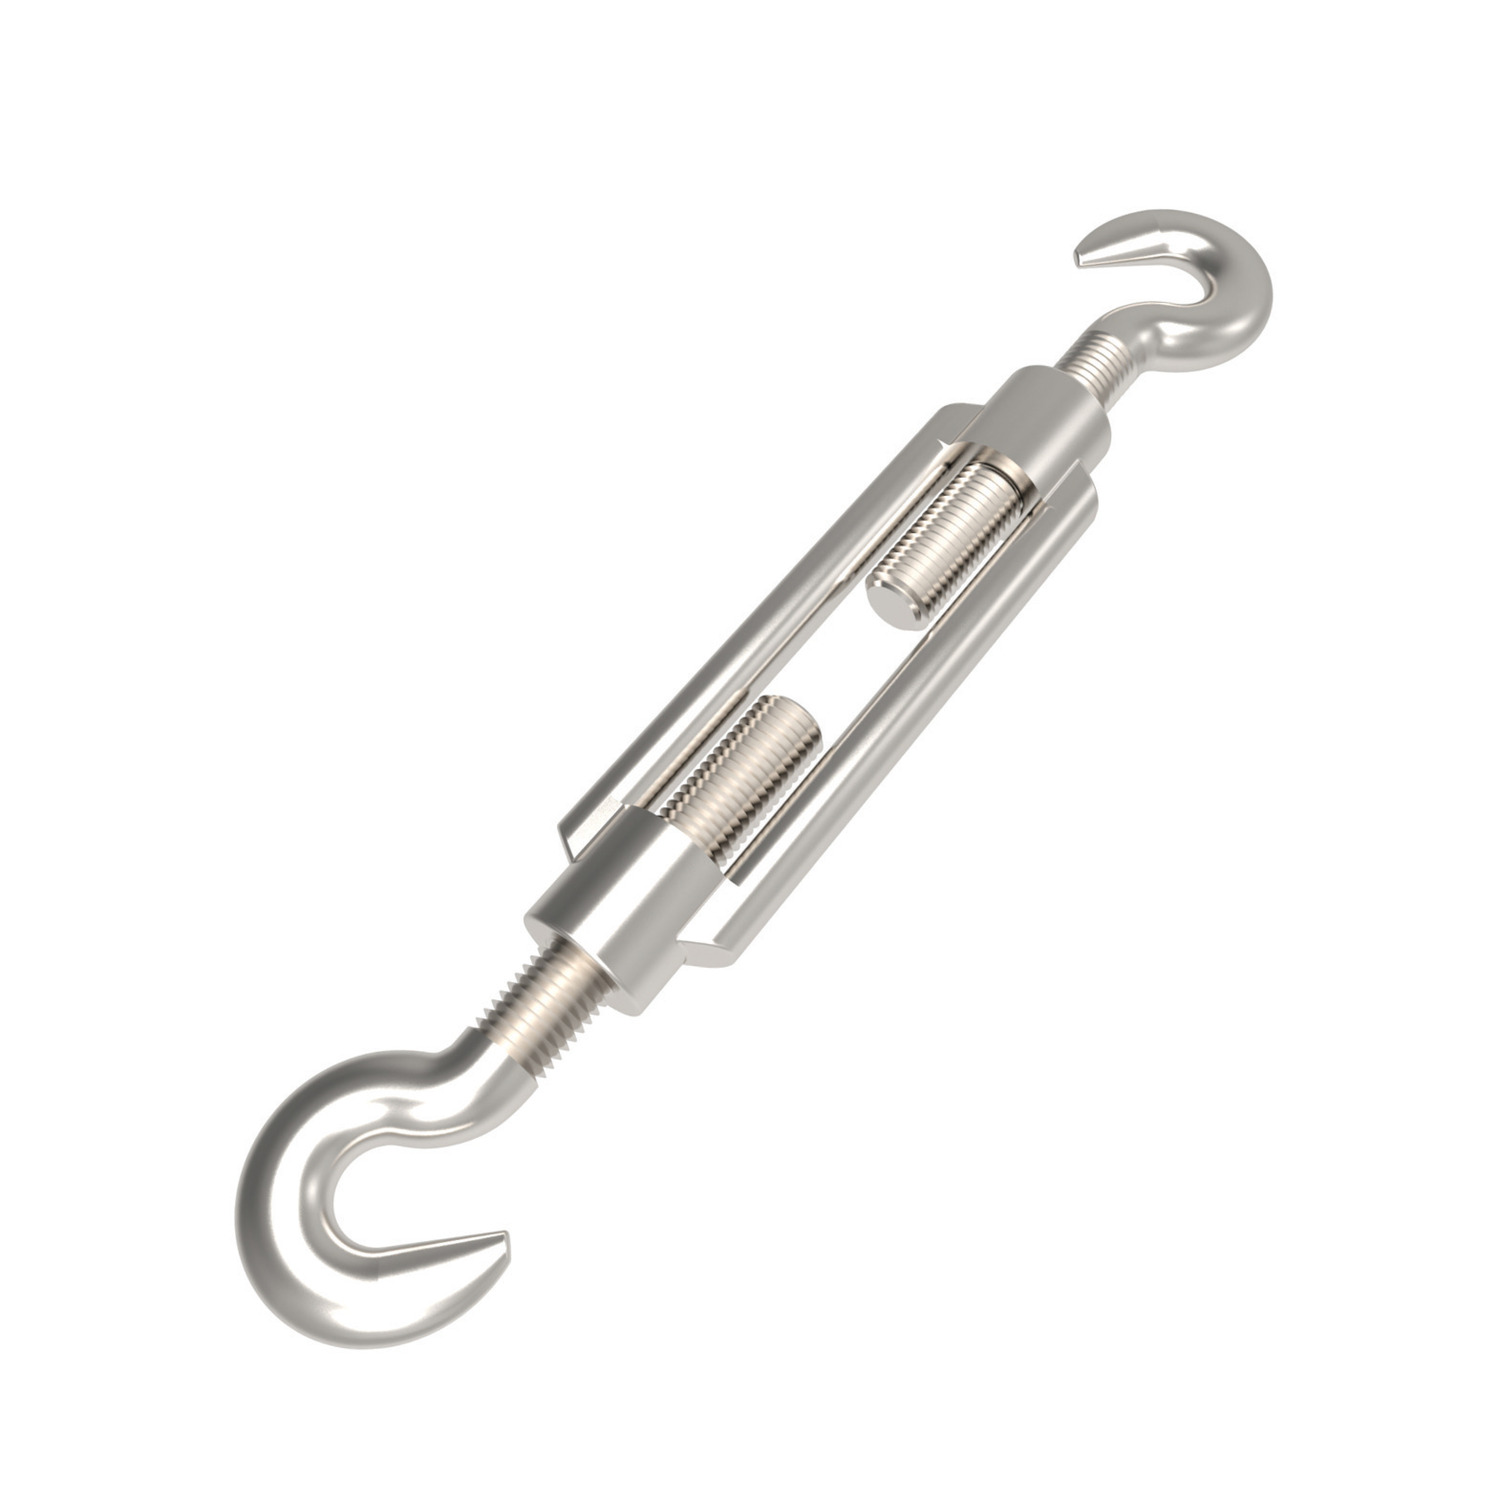 R3846.006-A4 Hook End Turnbuckles M6 A4 s/s Not to be used for lifting unless SWL marked.